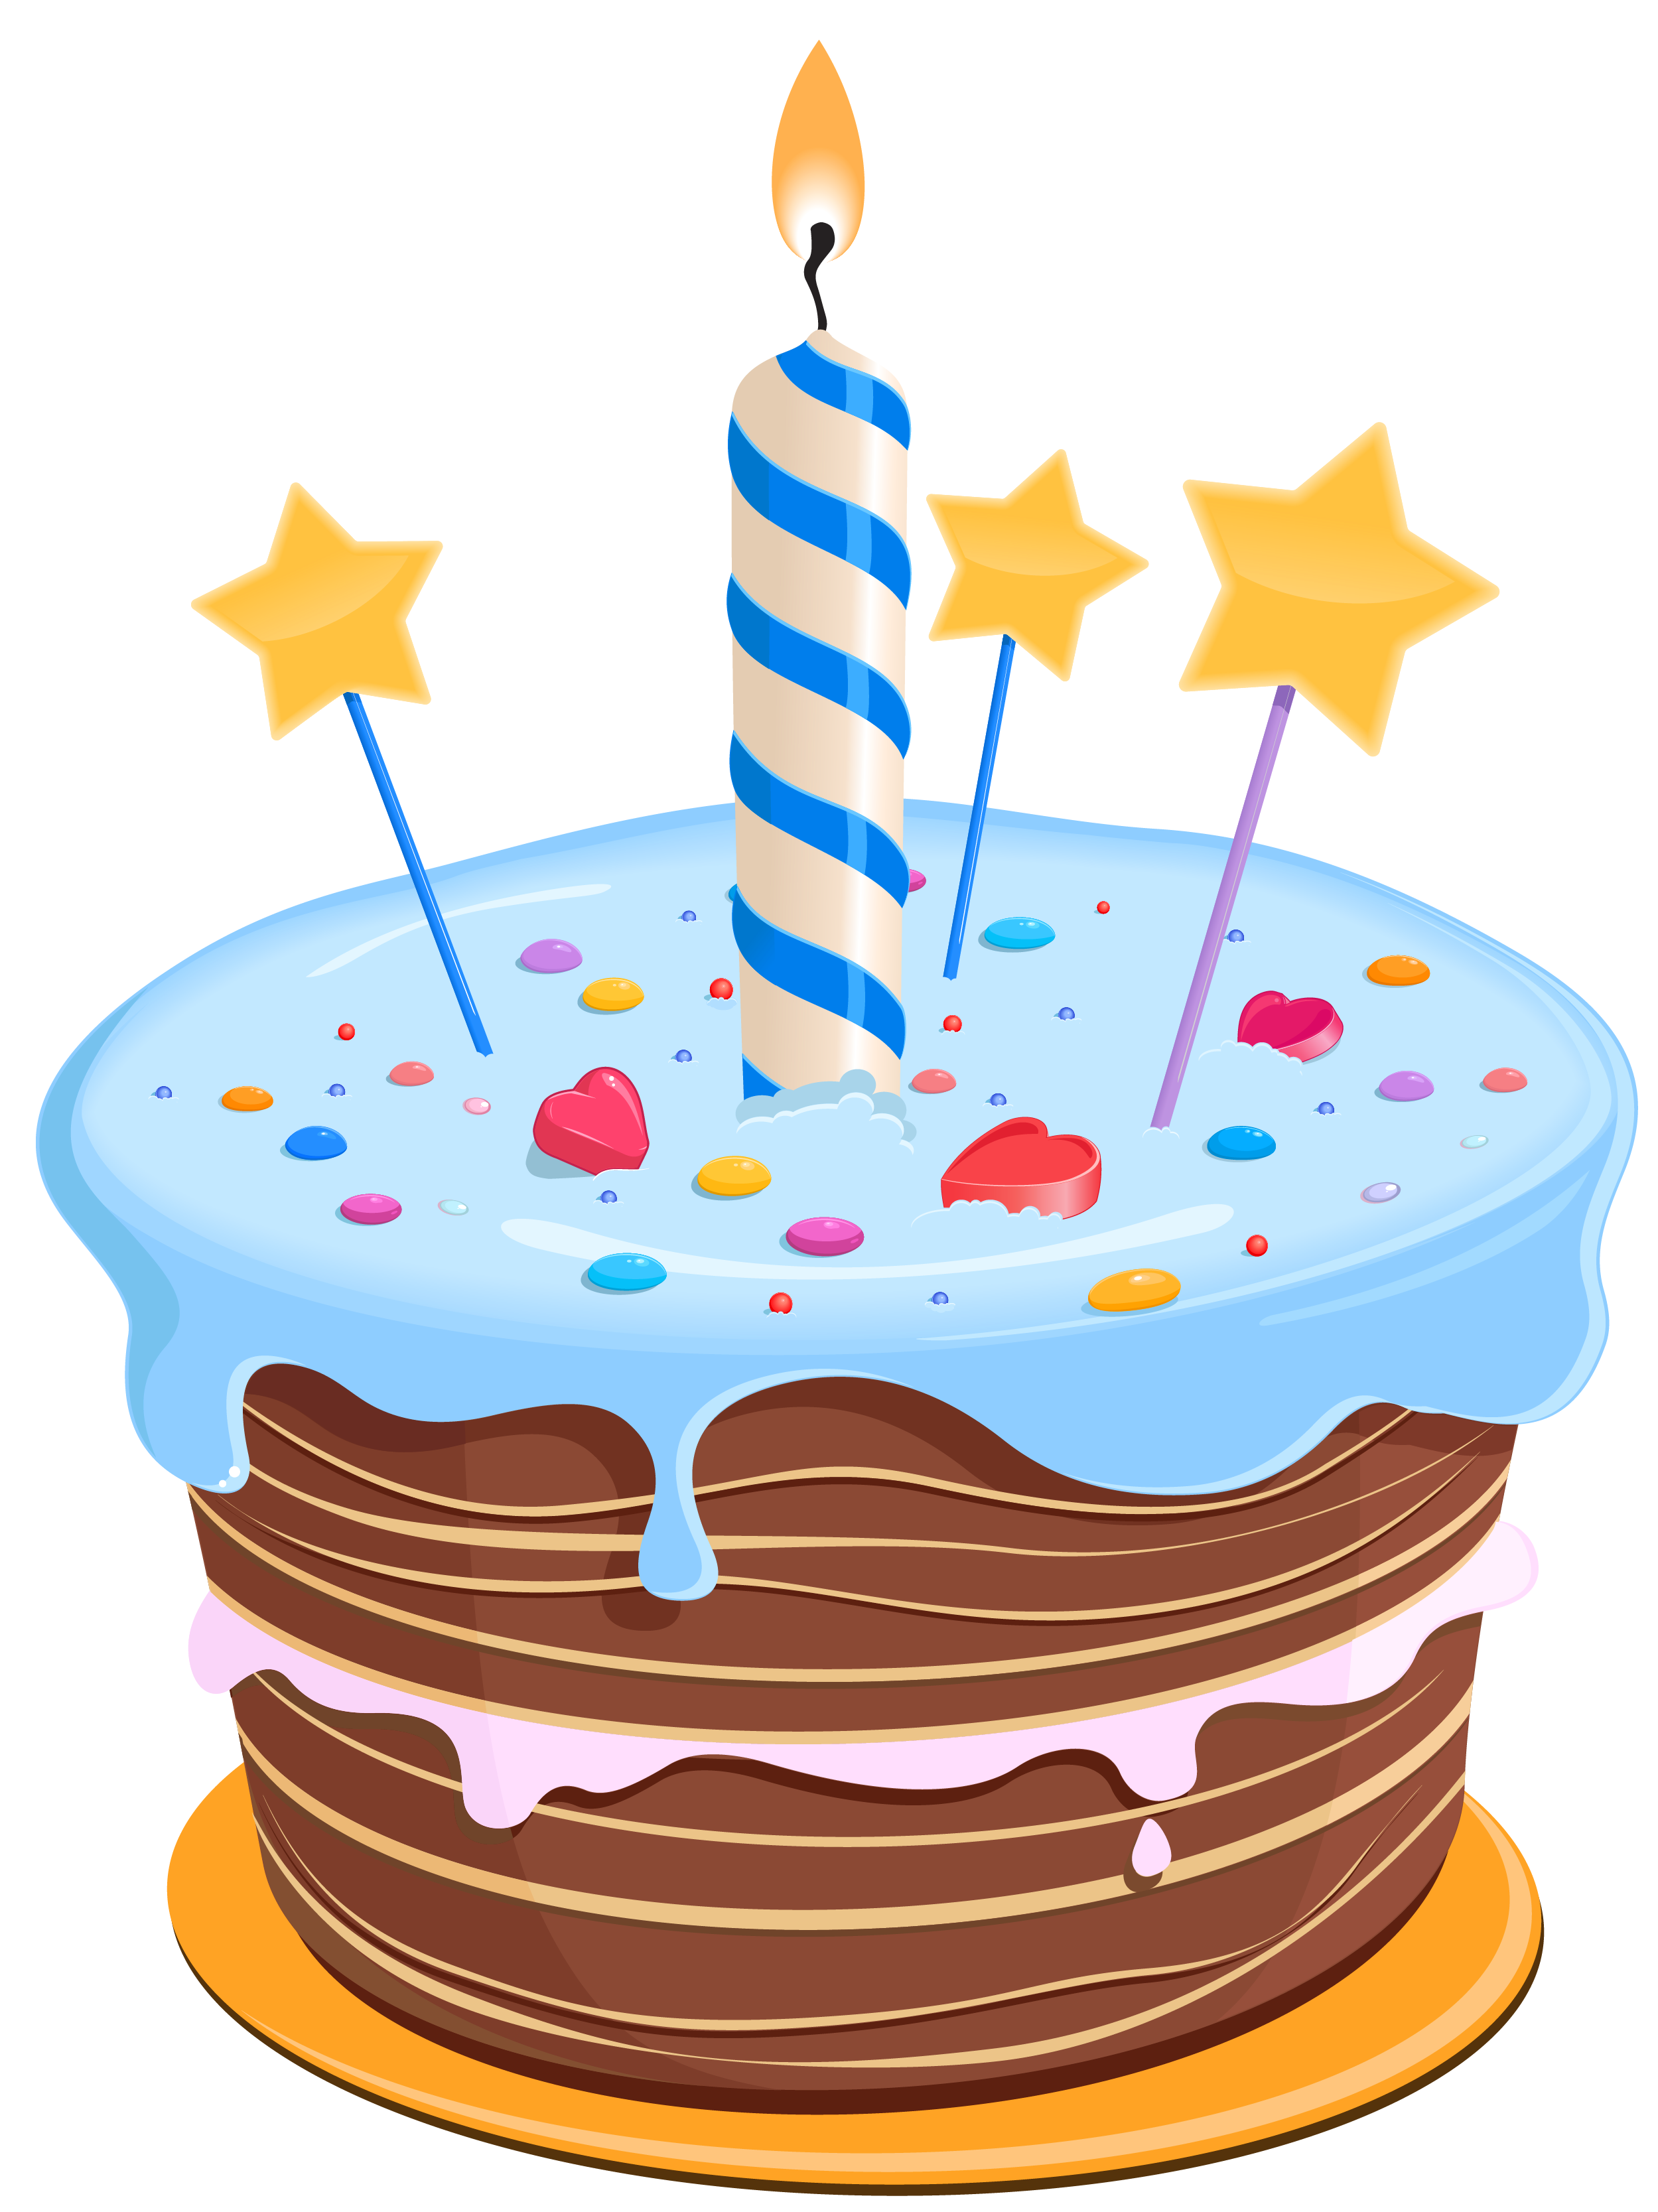 Birthday Cake Images Free | Free Download Clip Art | Free Clip Art ...